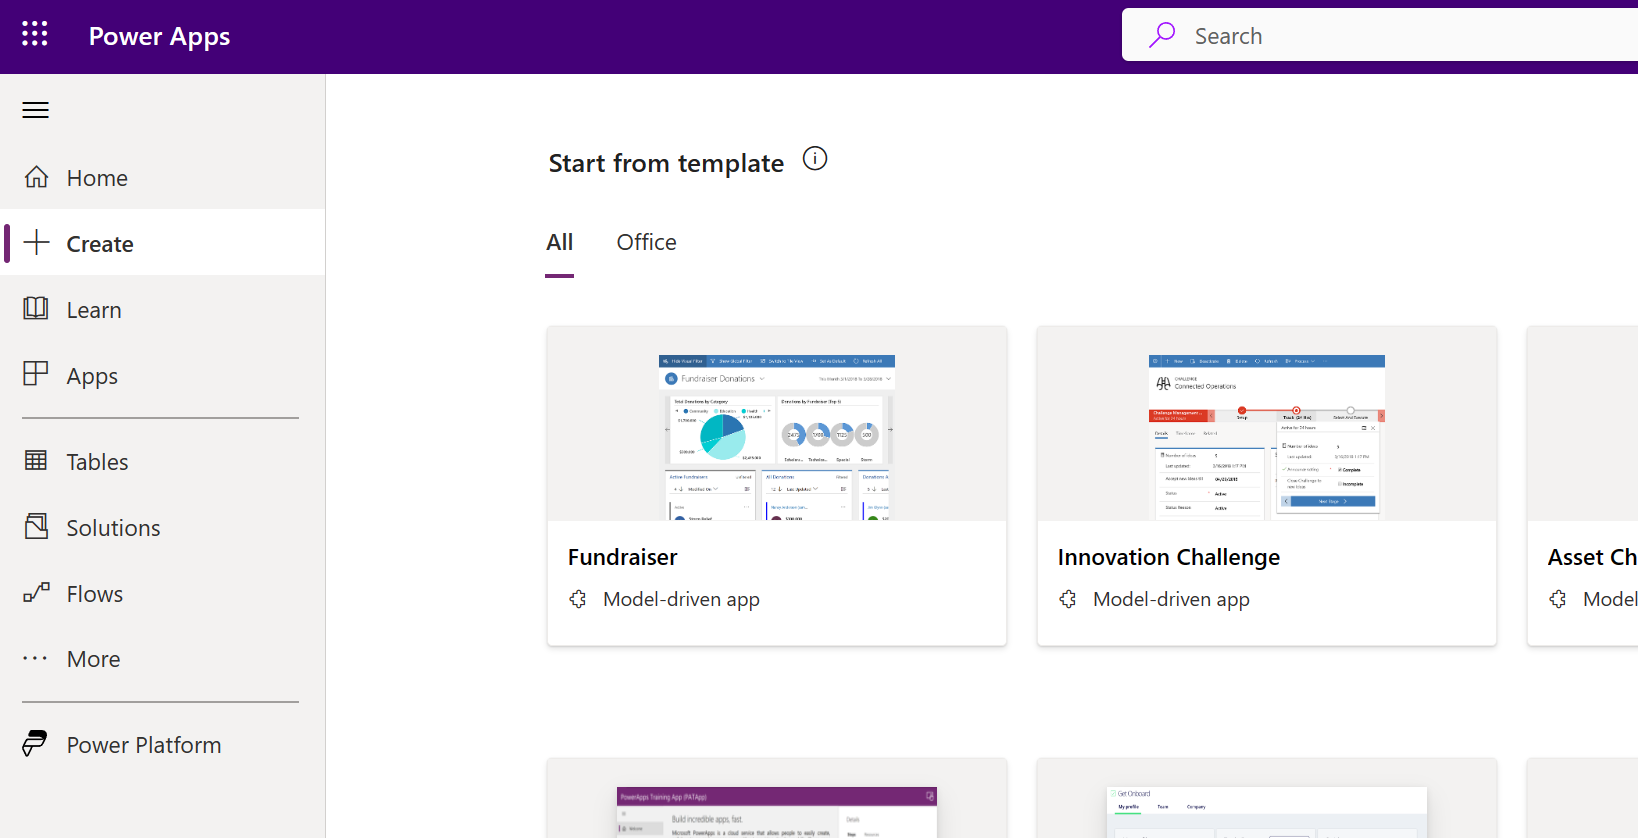 image shows the homepage of make.powerapps.com